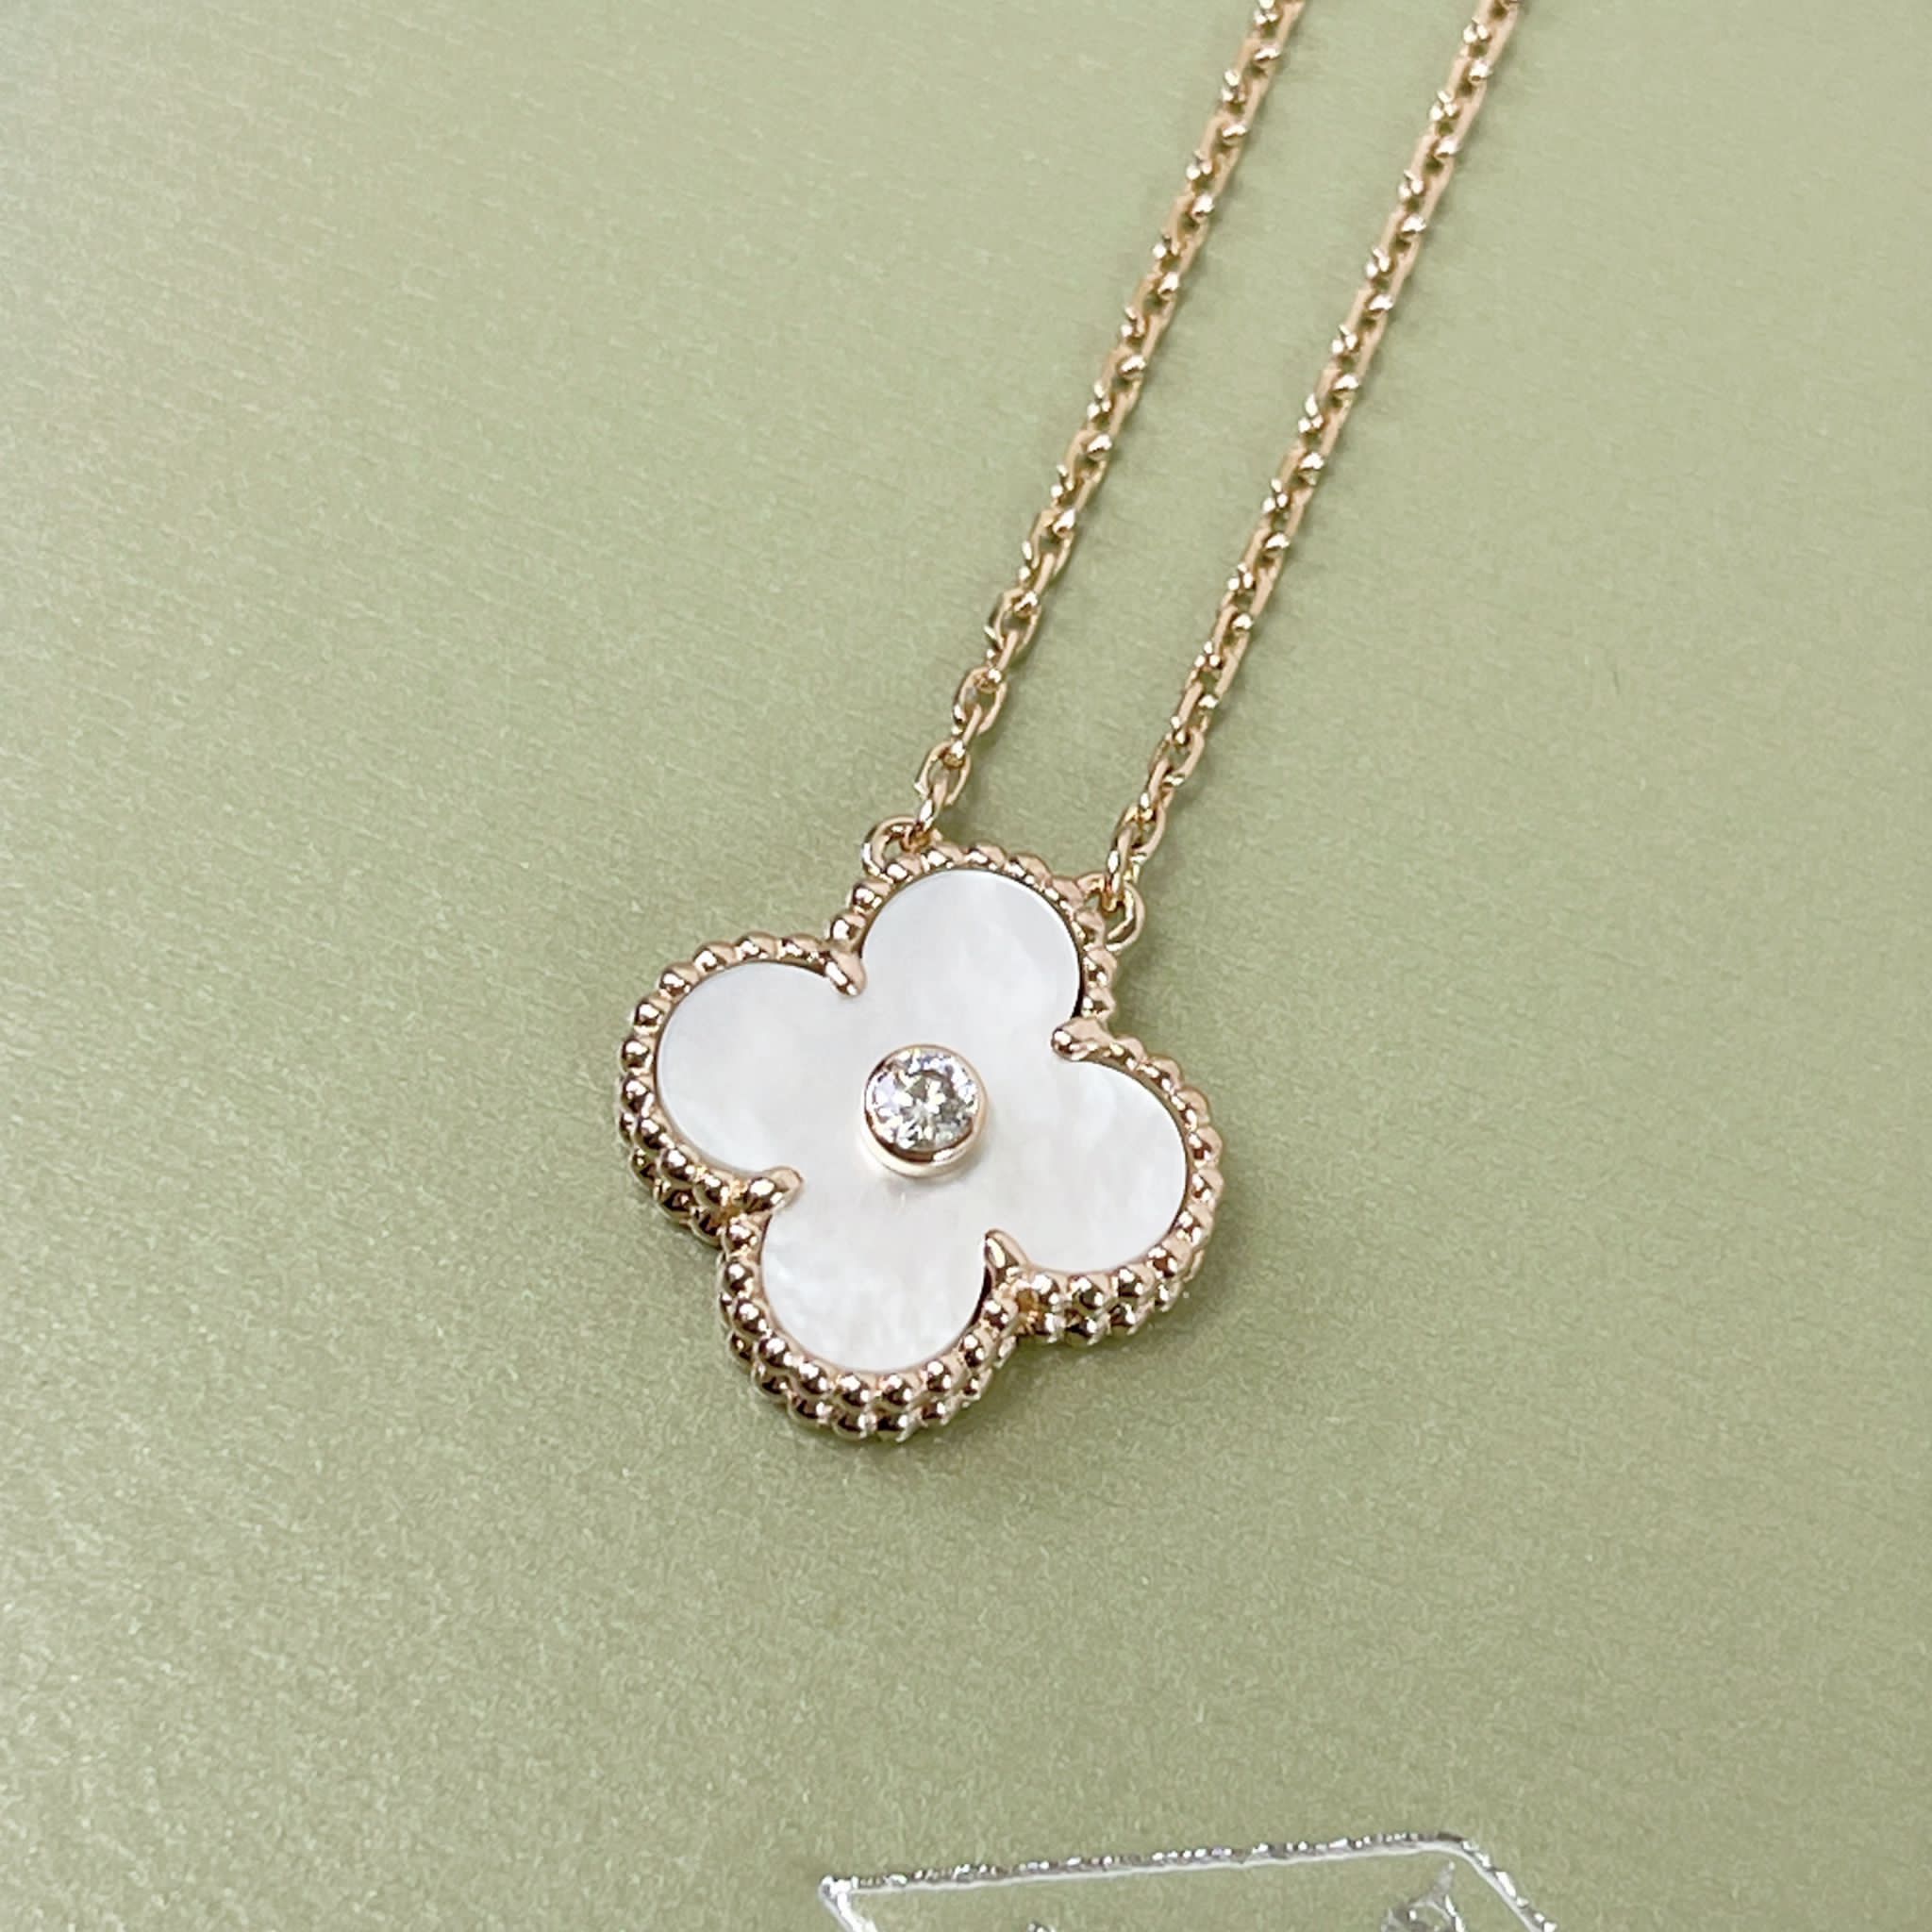 Van Cleef and Arpels Vintage Alhambra 1 Motif, Limited Edition Holiday Pendant Necklace